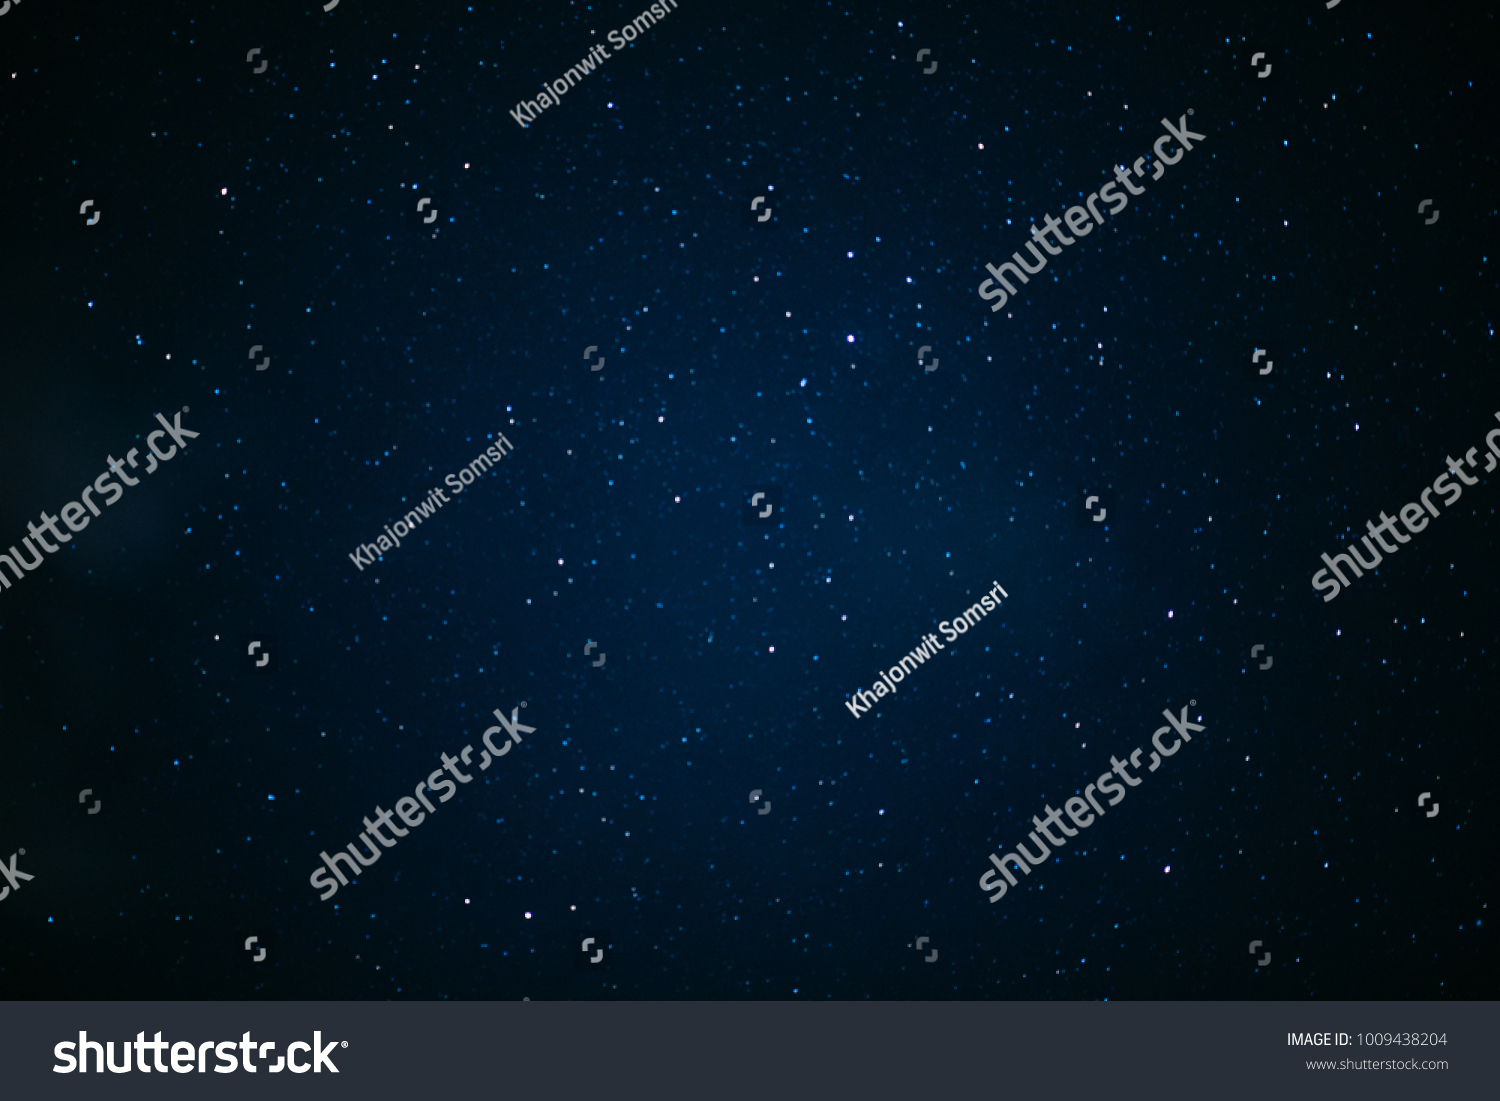 2,112 Navy blue starry background Images, Stock Photos & Vectors ...